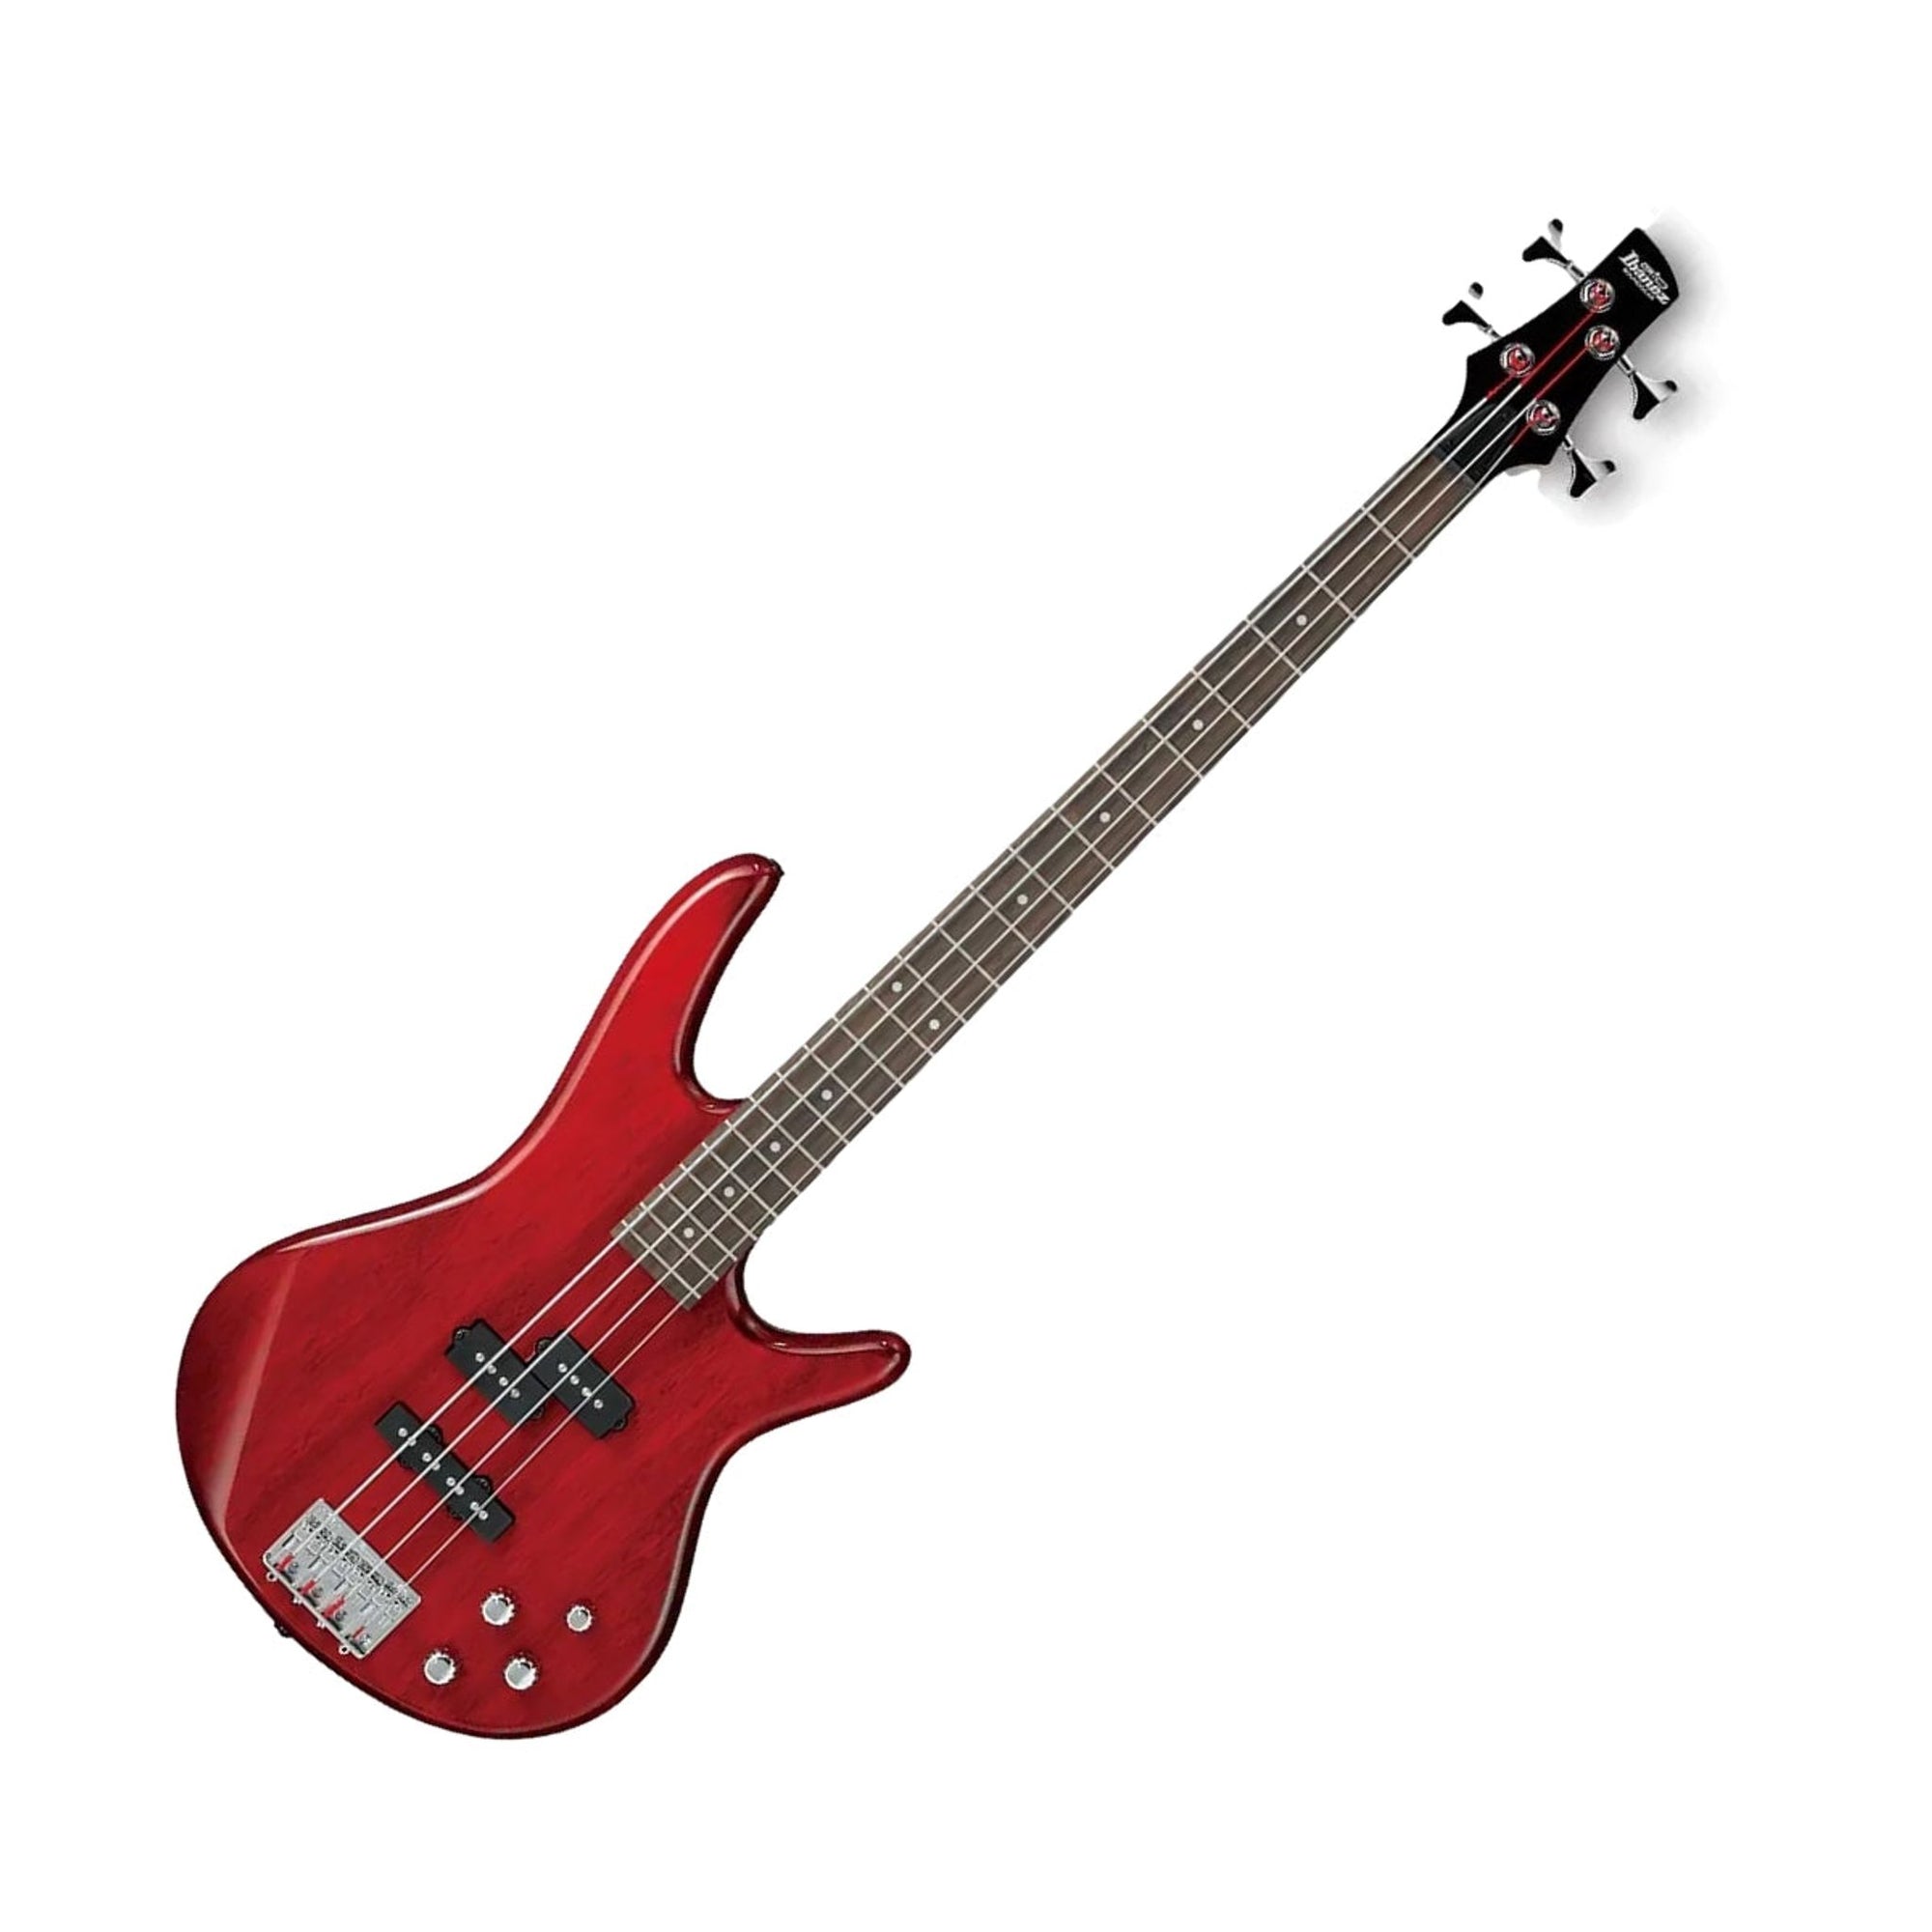 The Ibanez Gio SR200 is a great option for someone looking for something a bit more versatile than your standard entry level bass.